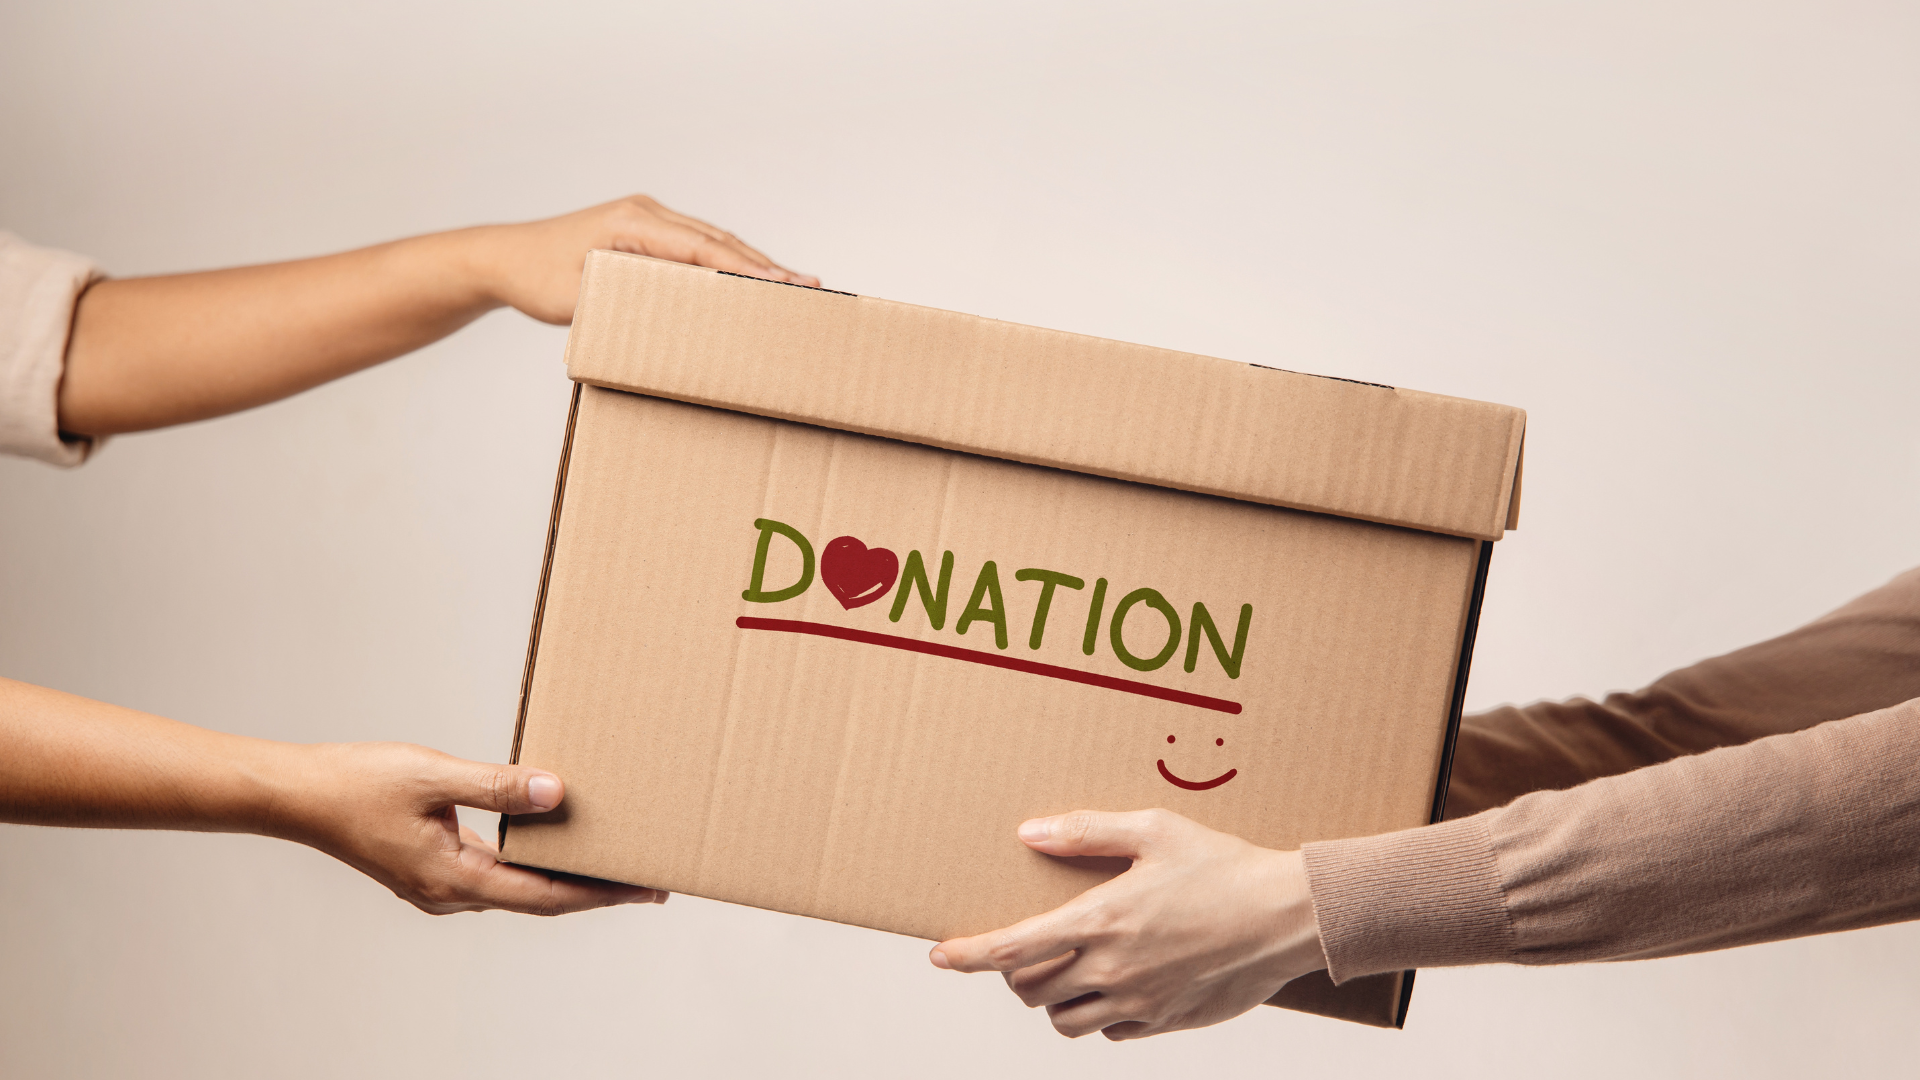 Fundraising ideas are important so that NGOs can employ them and be effective